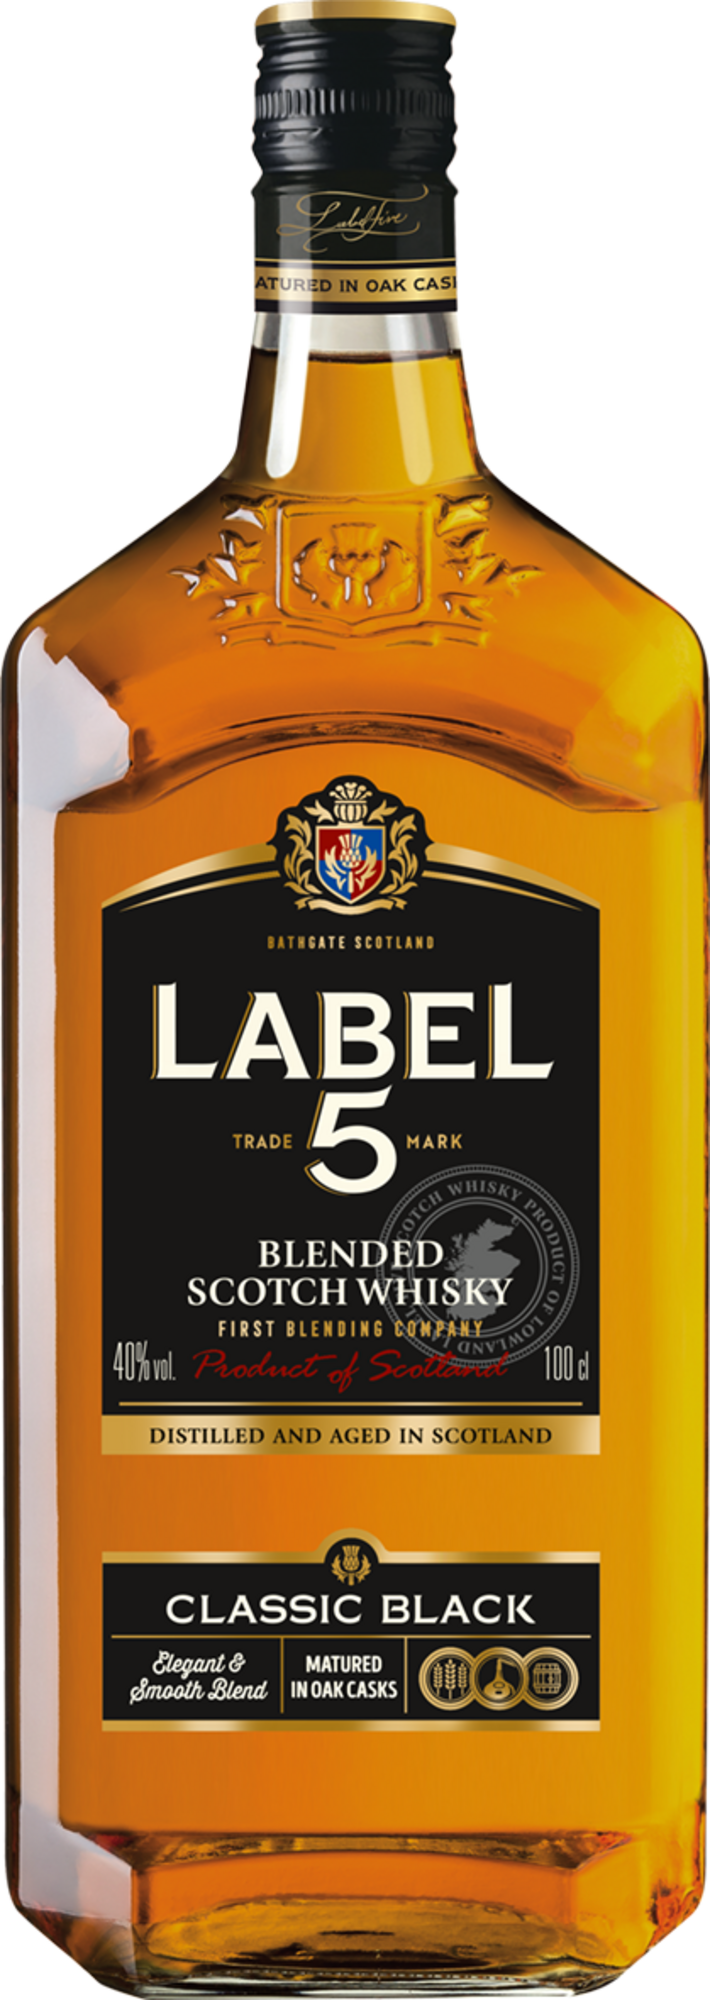 BLENDED SCOTCH WHISKY CLASSIC BLACK